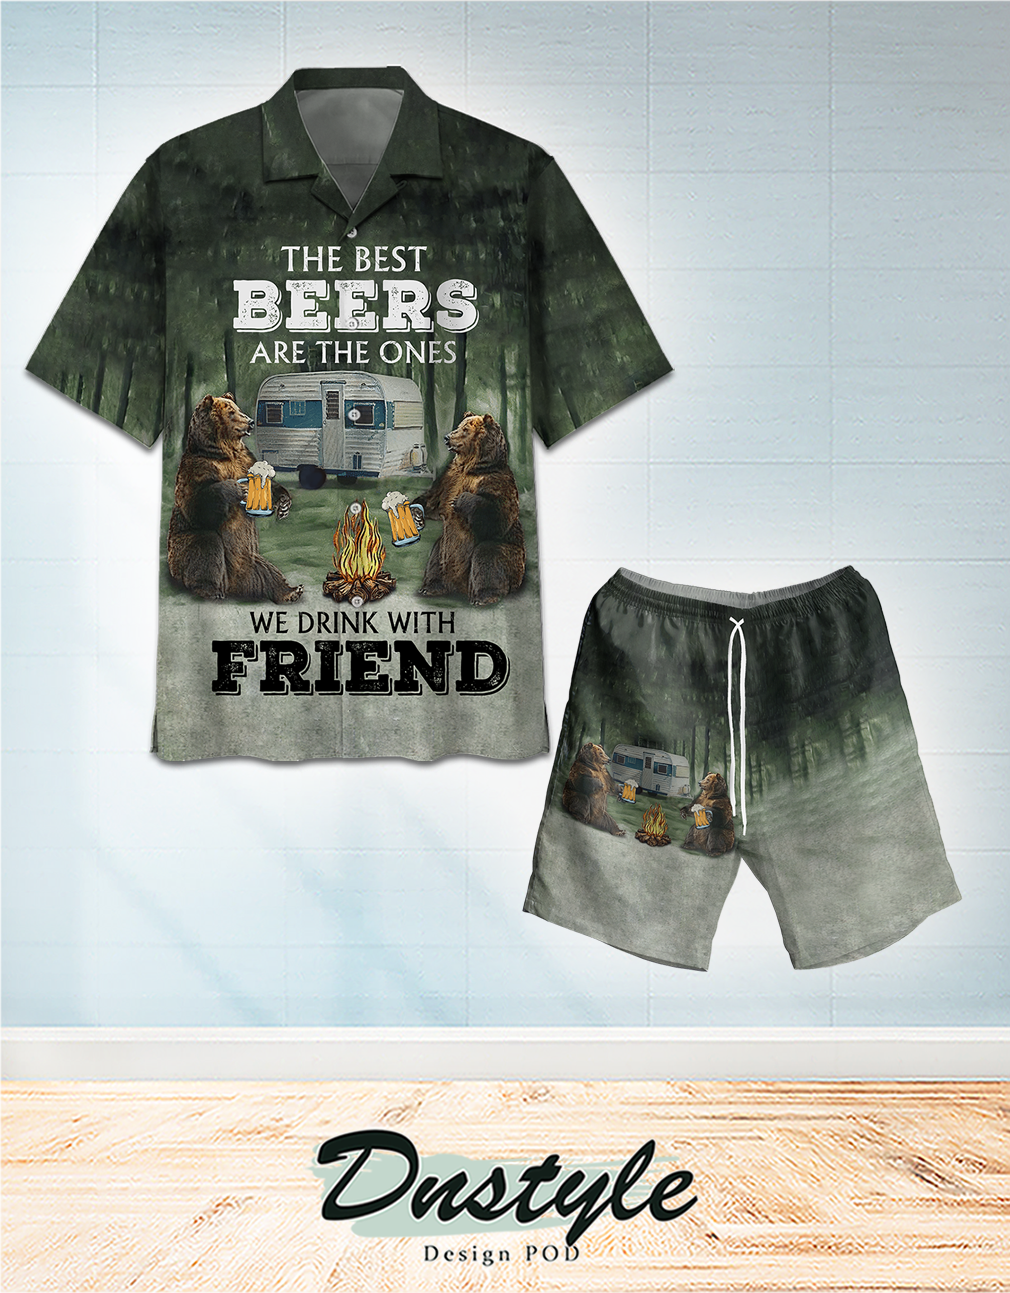 Bear the best beers are the ones we drink with friend hawaiian shirt and short